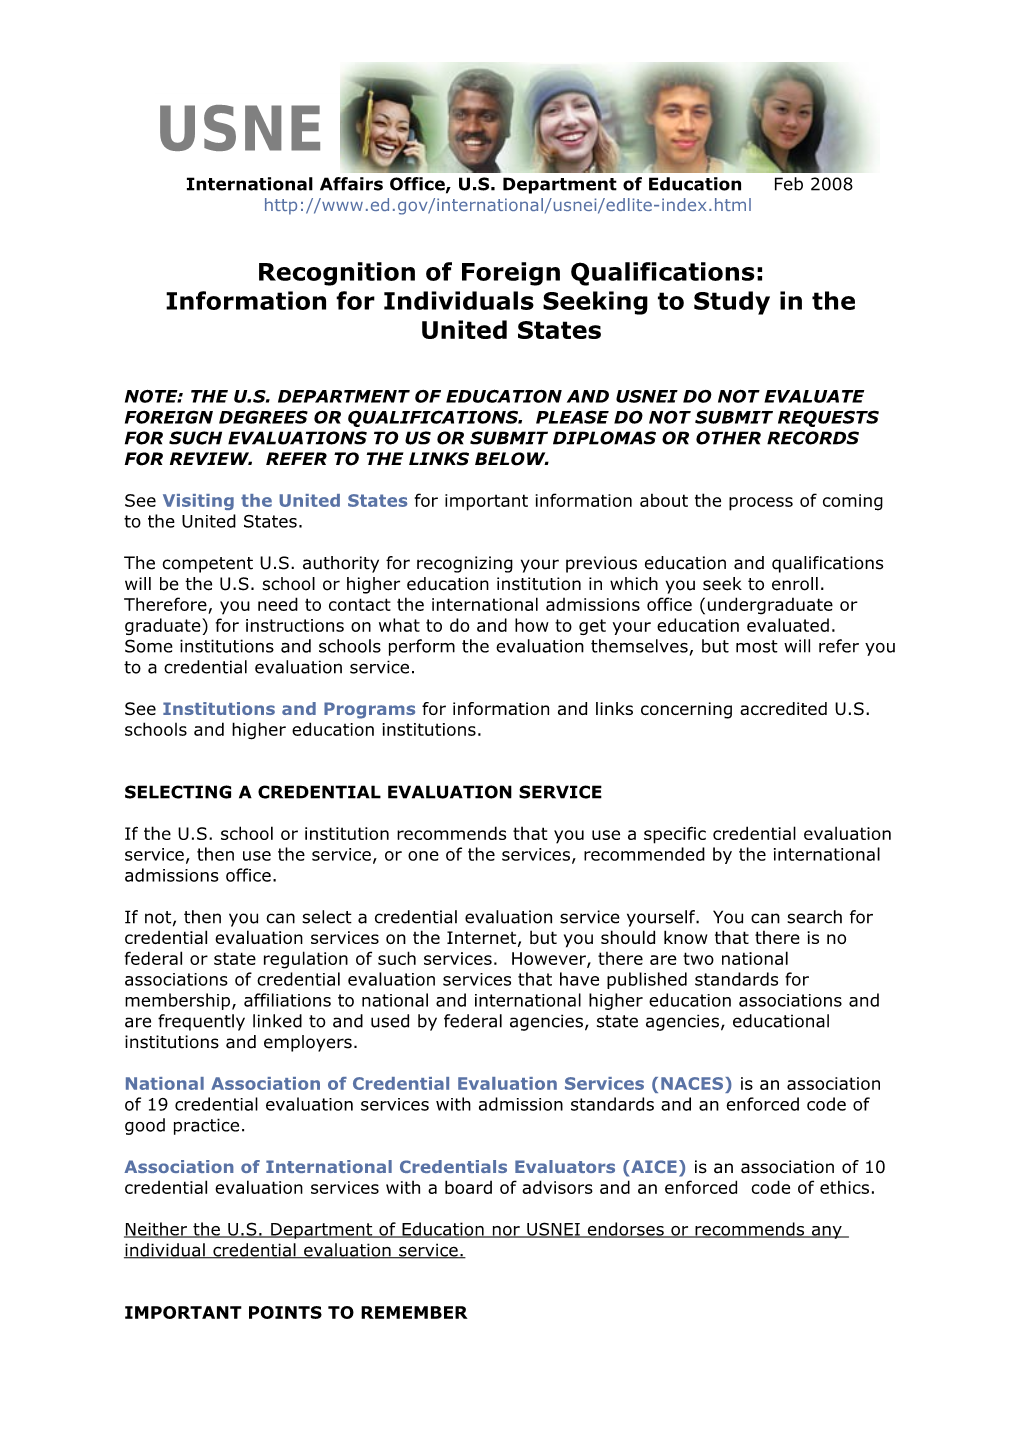 Recognition of Foreign Qualifications: Information for Individuals Seeking to Study In